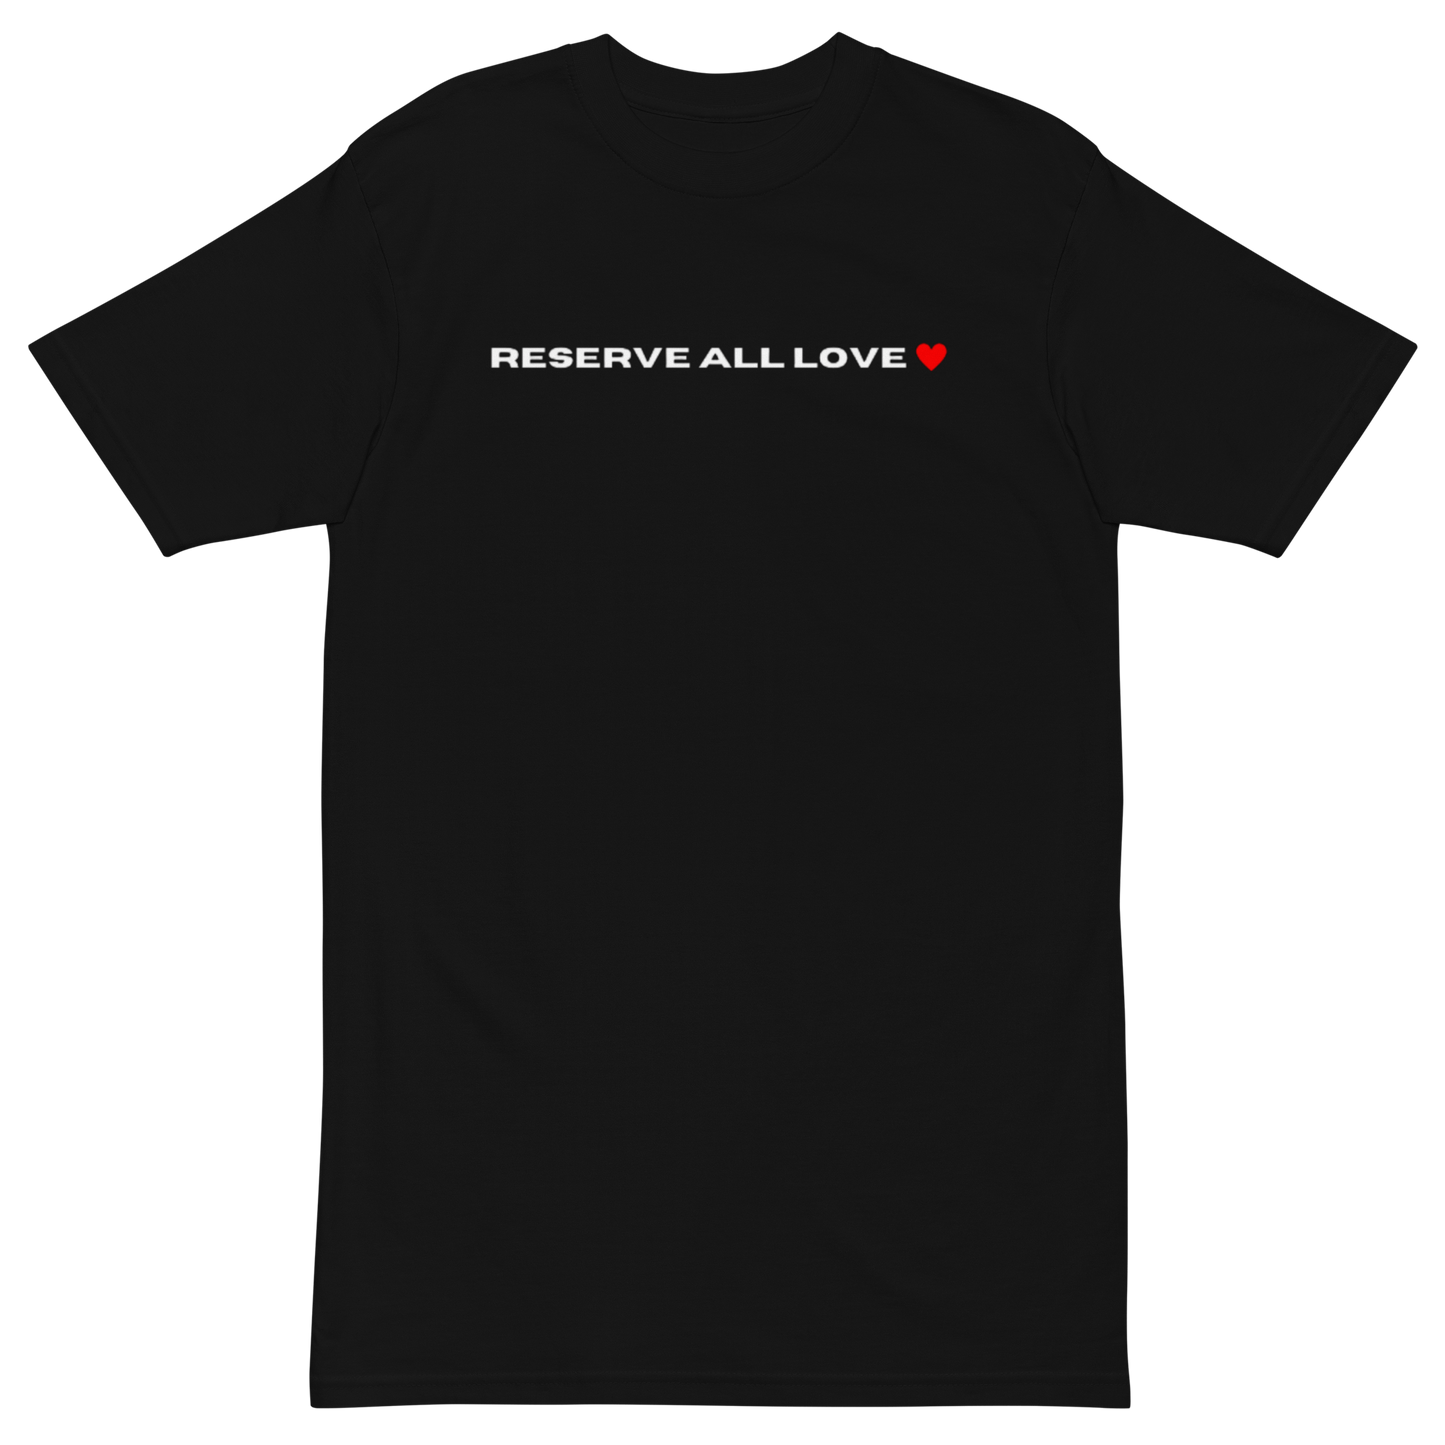 Reserve All Love Tee